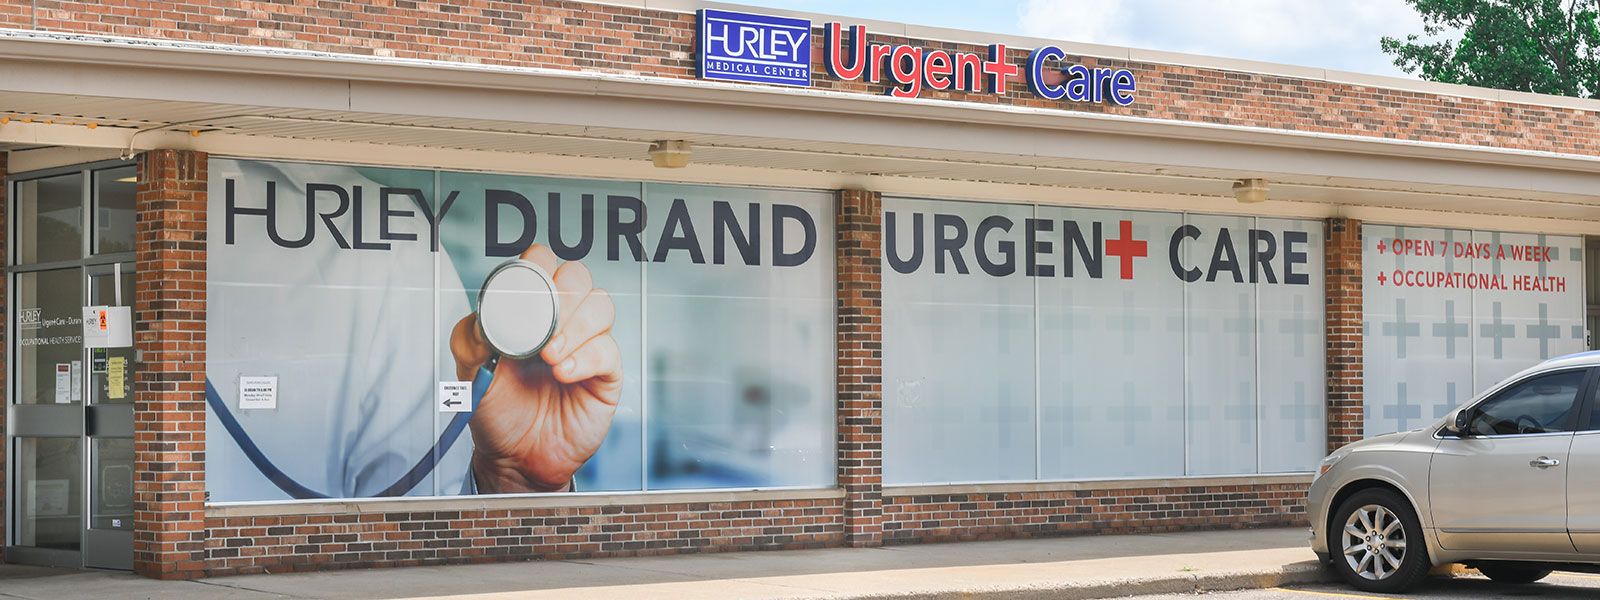 Hurley Urgent Care - Durand